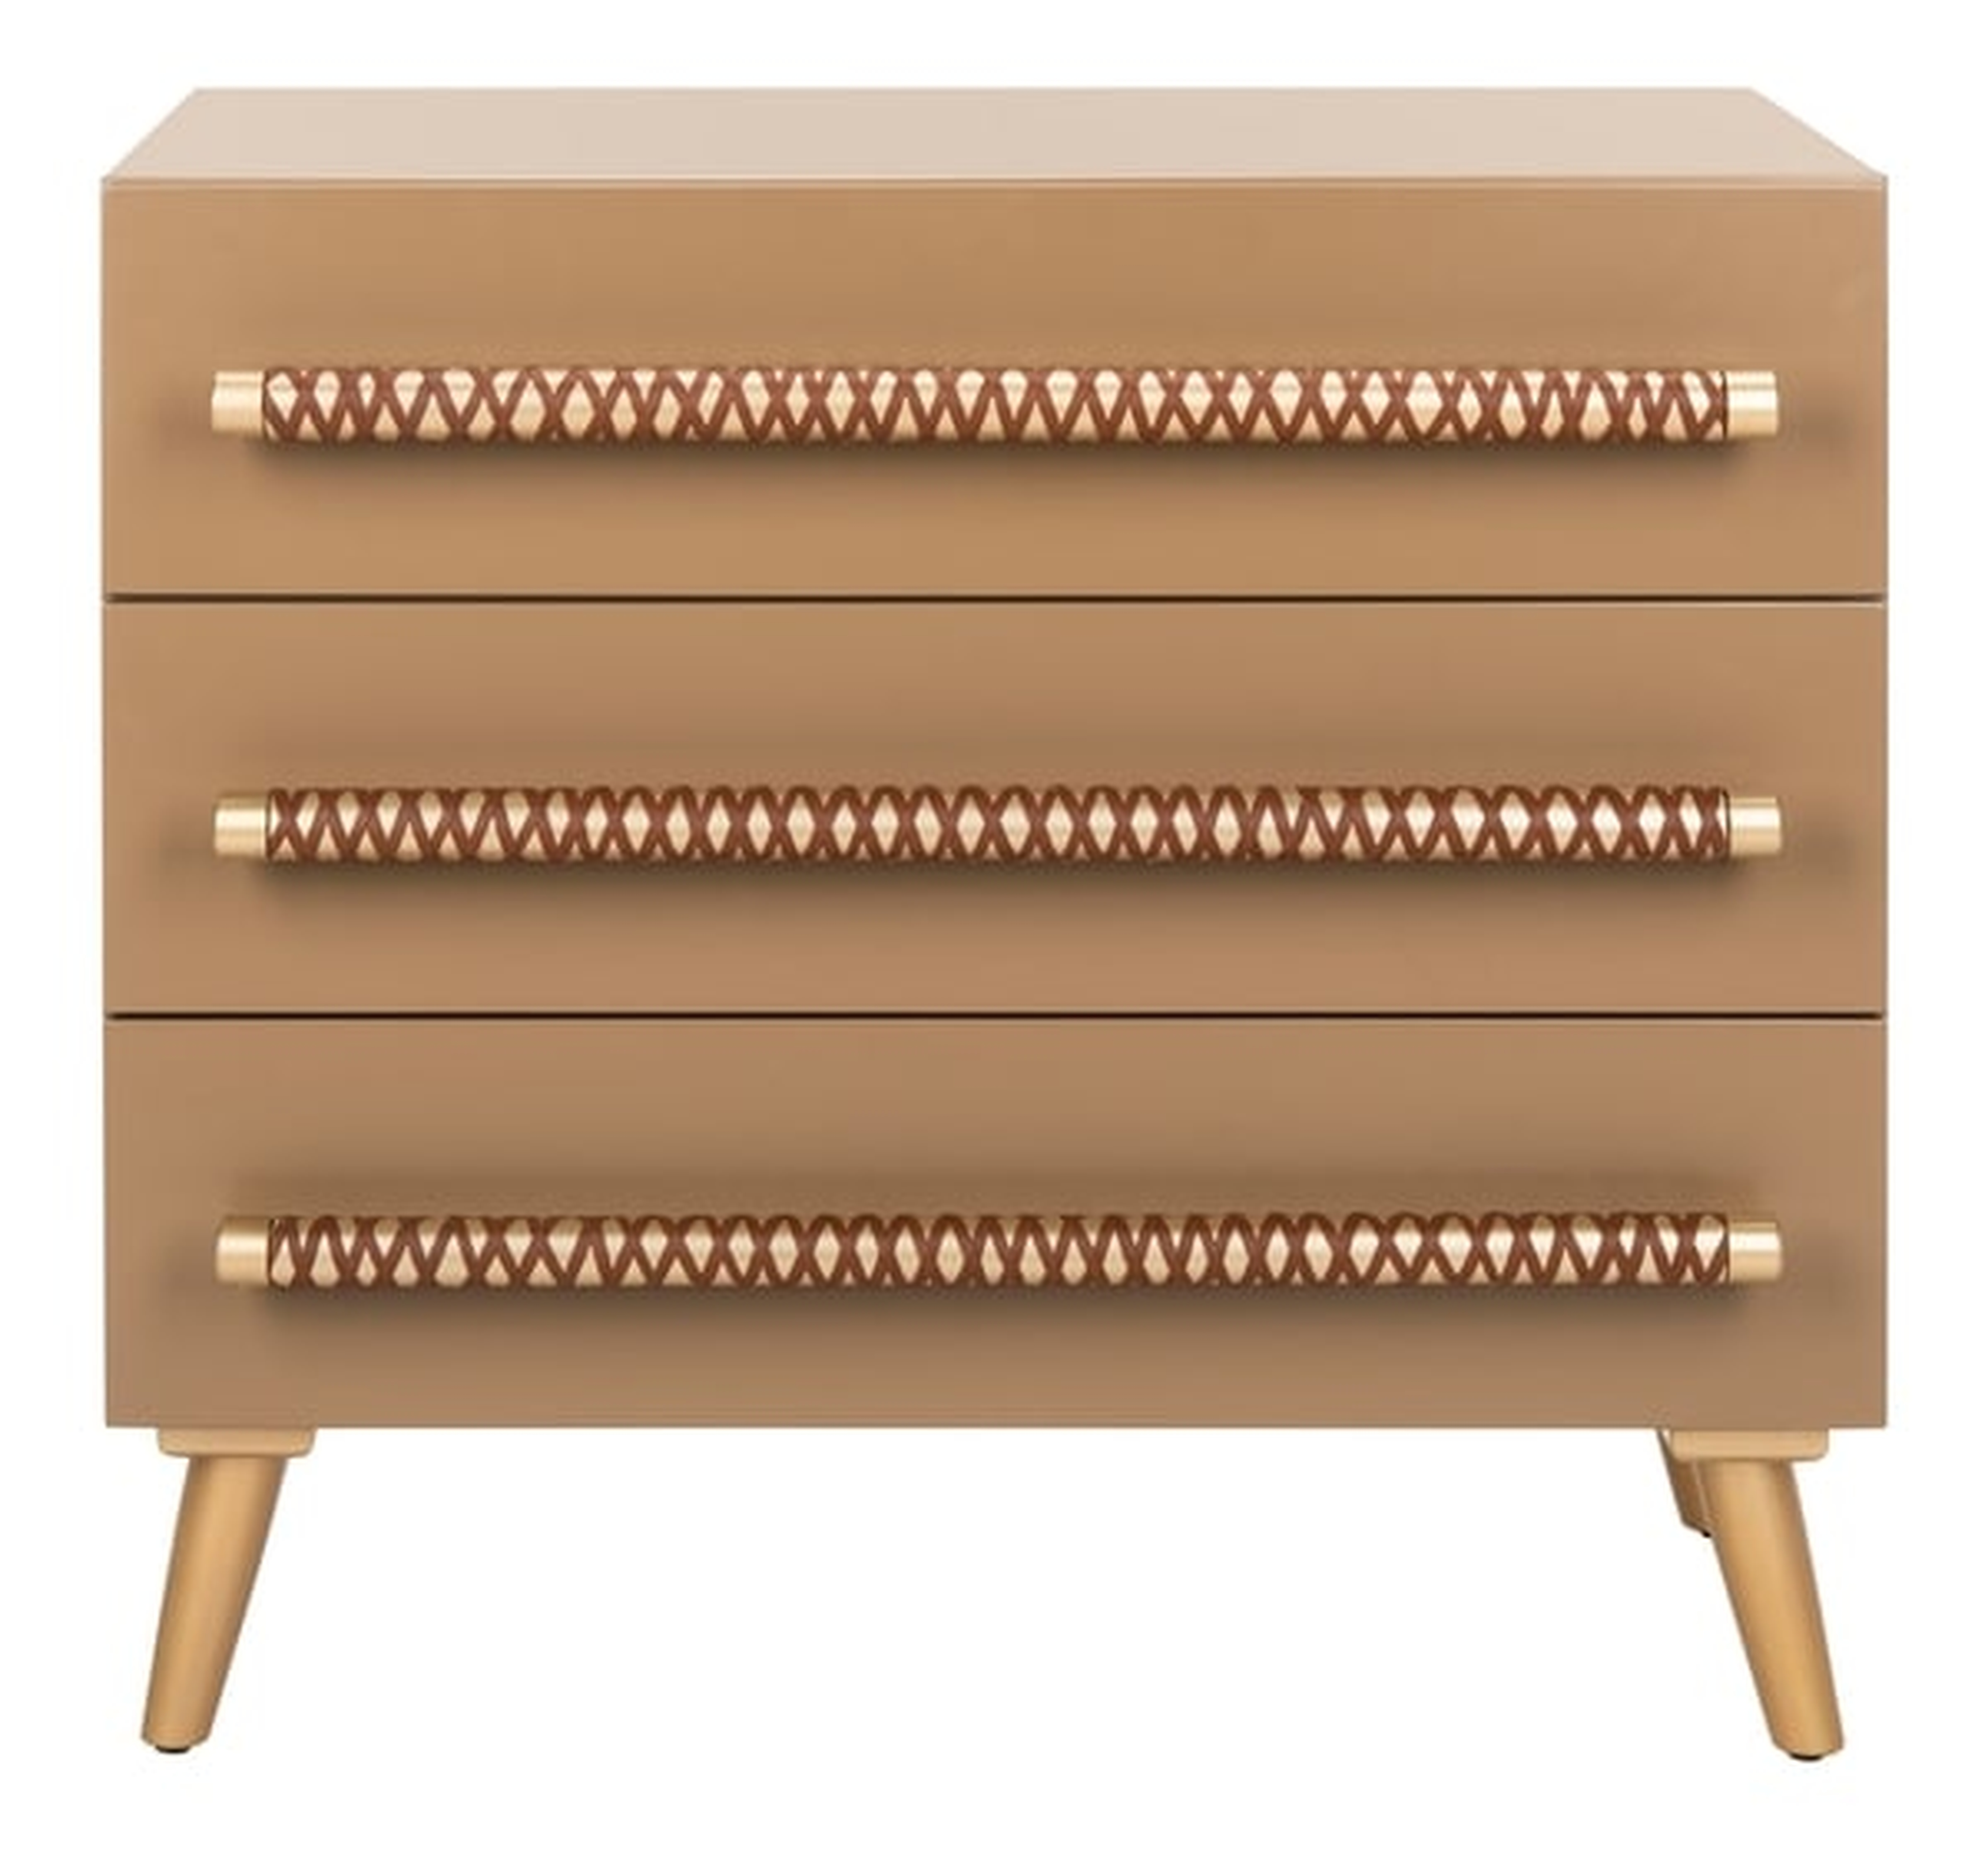 Raquel 3 Drawer Chest - Taupe/Gold - Arlo Home - Arlo Home